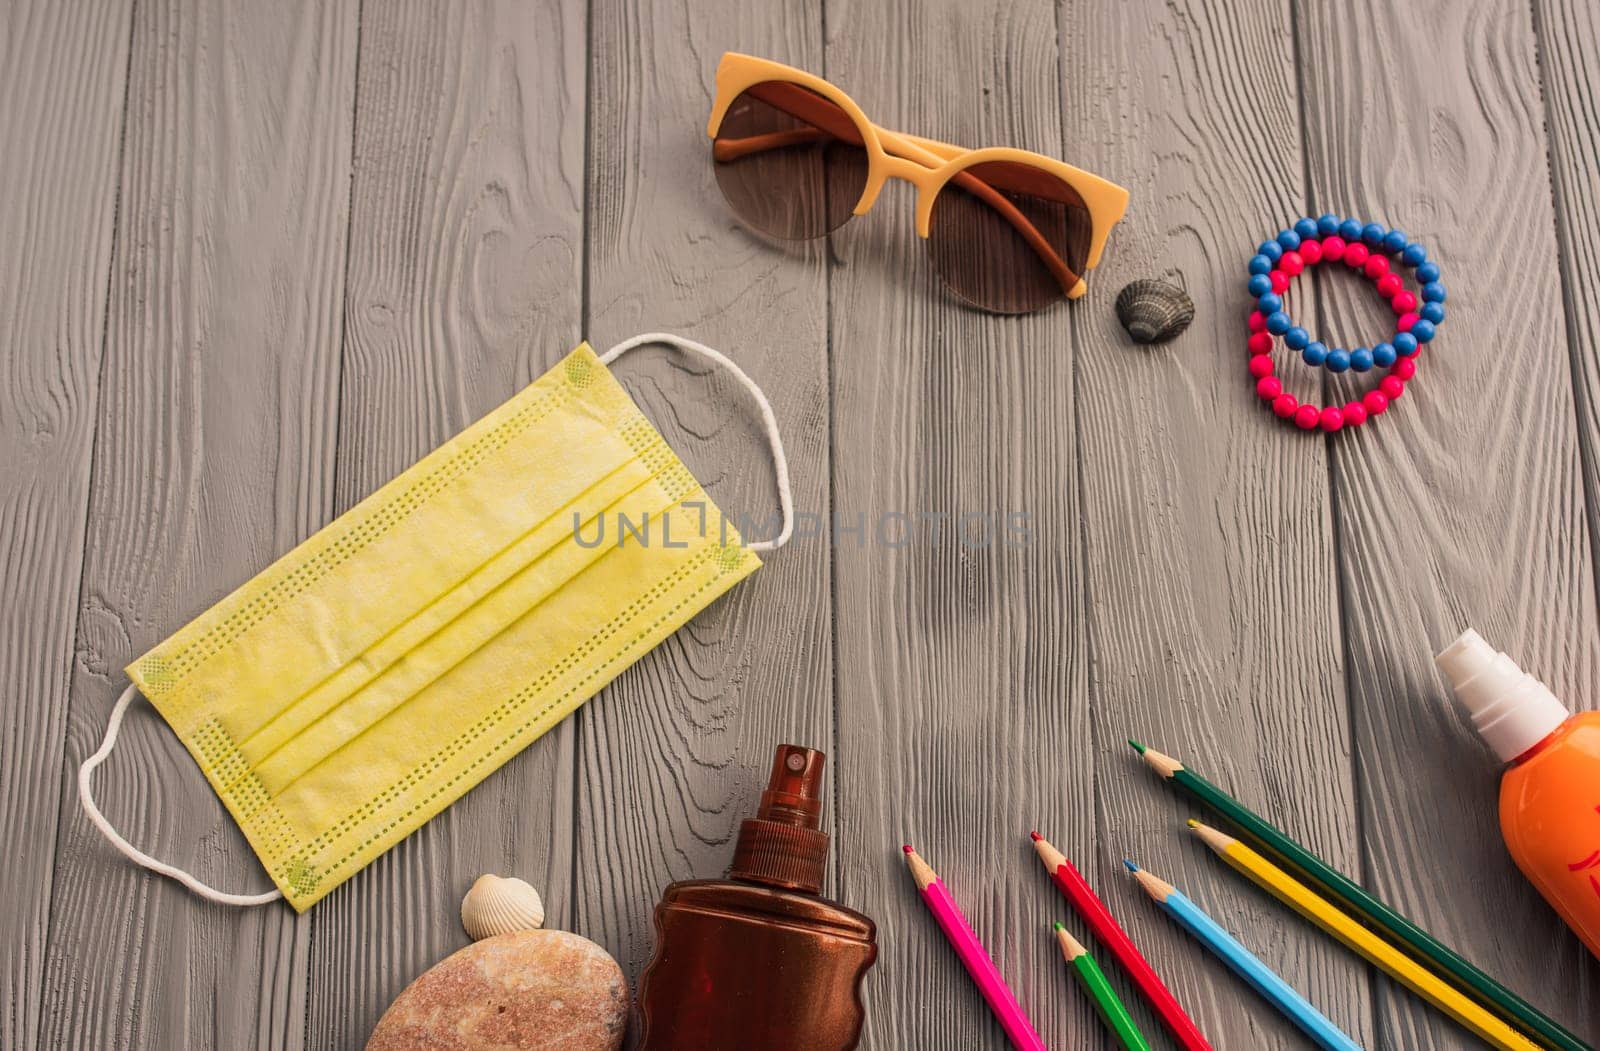 New normal covid-19 face mask sun protection sunglasses accessories sunscreen spray lotion tan ultra-violet rays. Summer background template mockup free space composition sample text. Top view above